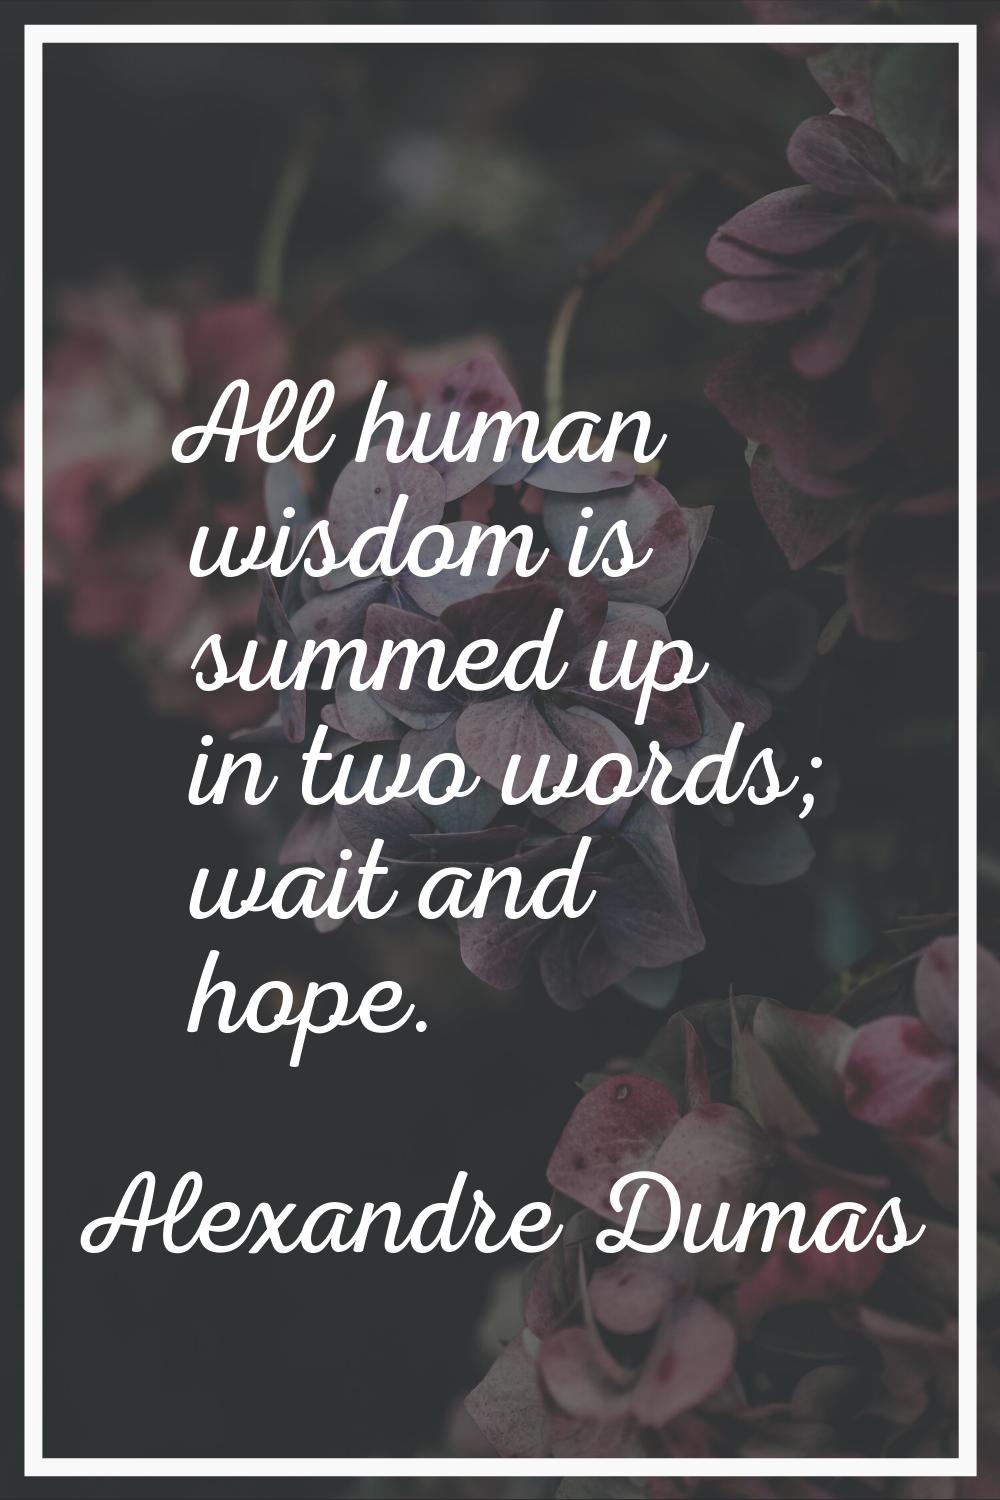 All human wisdom is summed up in two words; wait and hope.